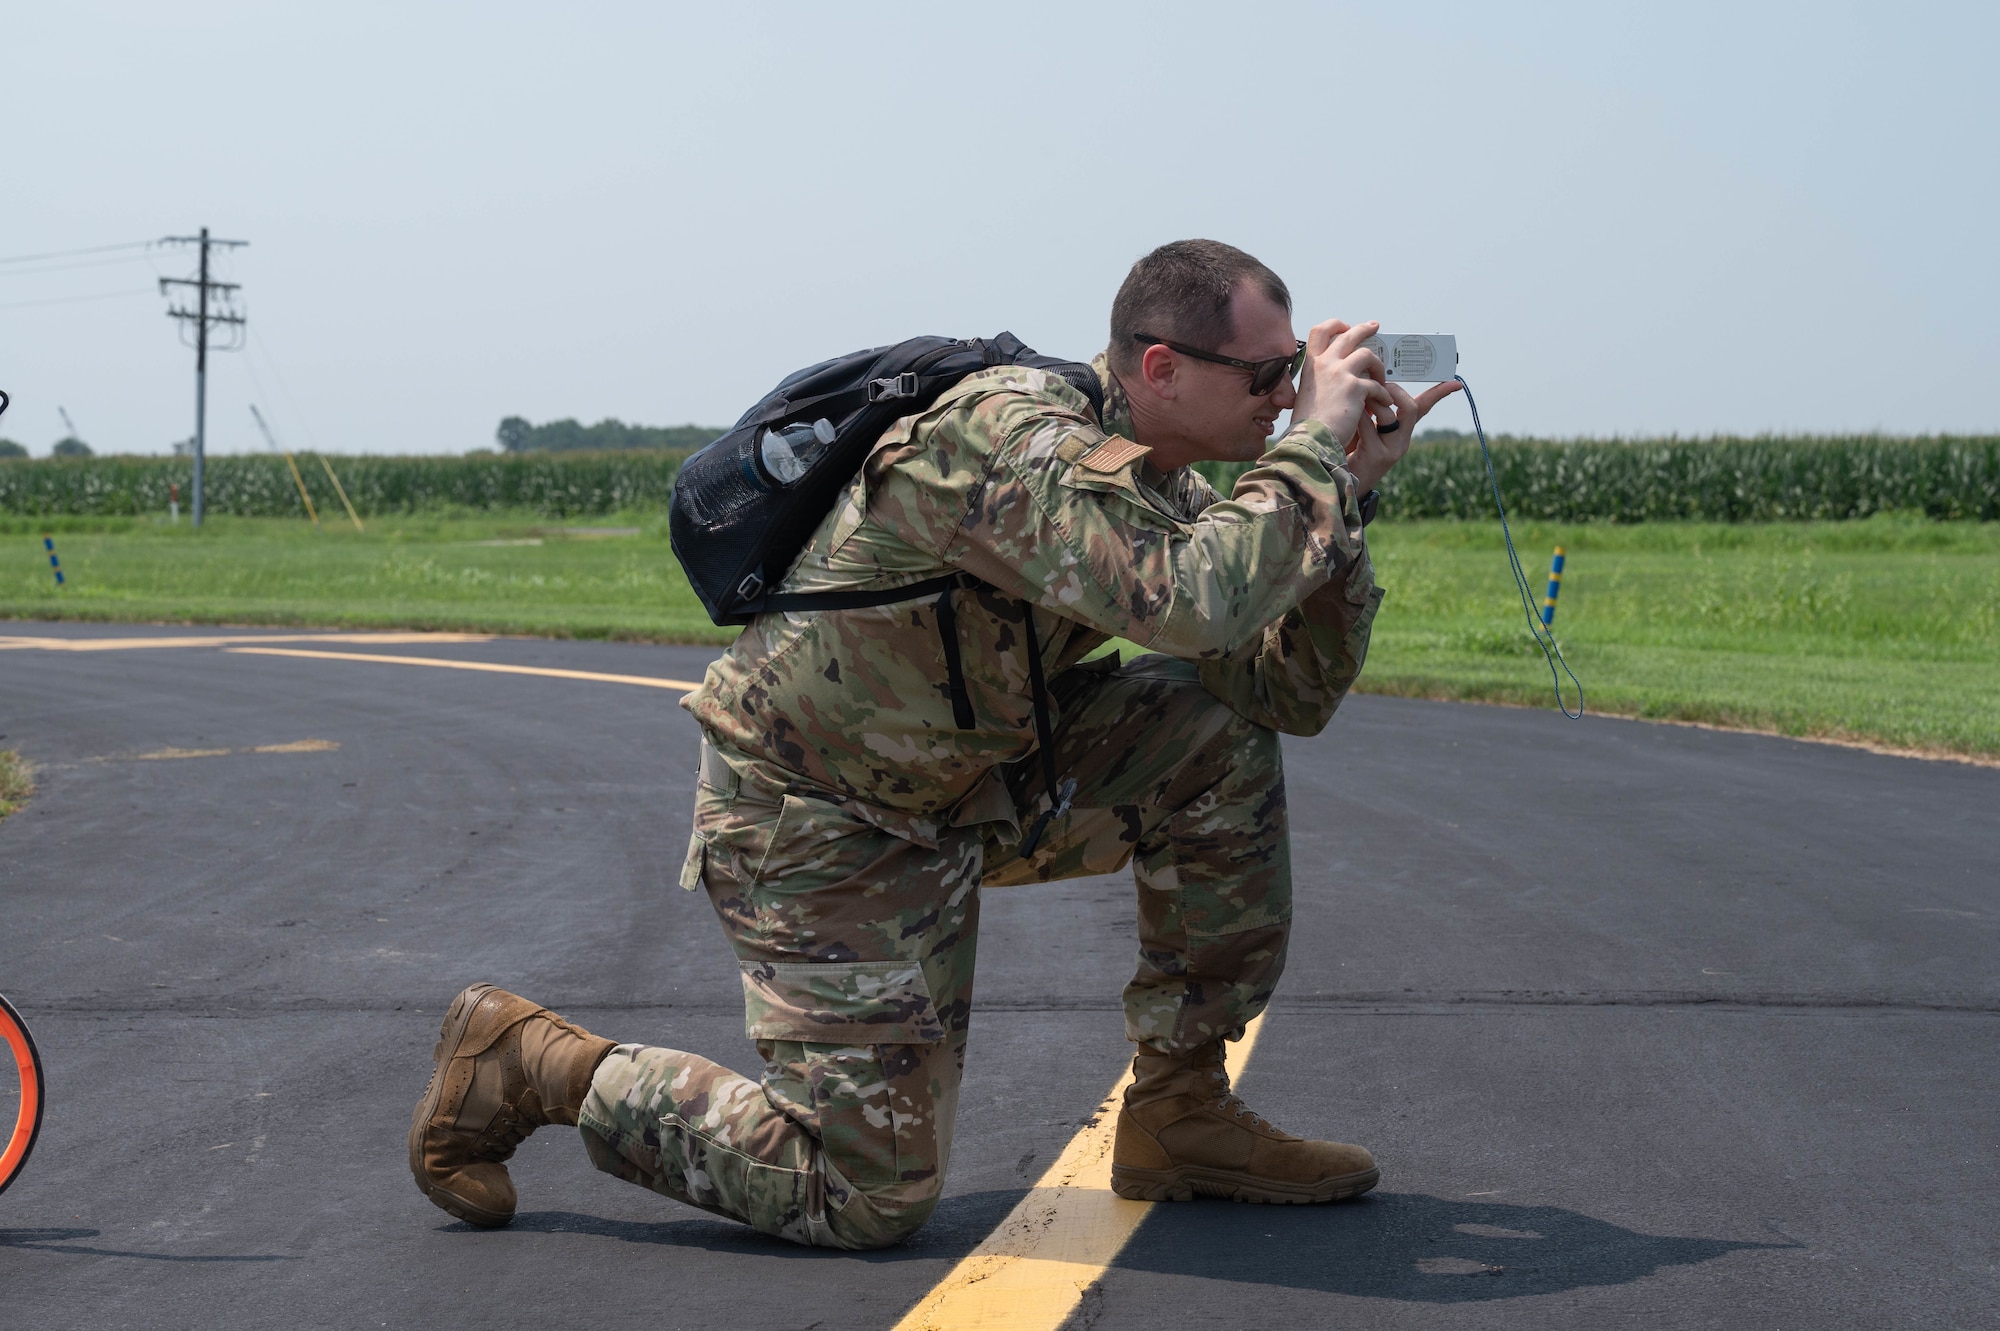 U.S. Air Force Tech. Sgt. Ryan Rathke, Landing Zone Operations Course student, measures the glide slope of a simulated landing zone at Schafer Field in St. Jacob, Illinois, July 30, 2021. As part of the Landing Zone Operations Course students simulate surveying a landing zone.